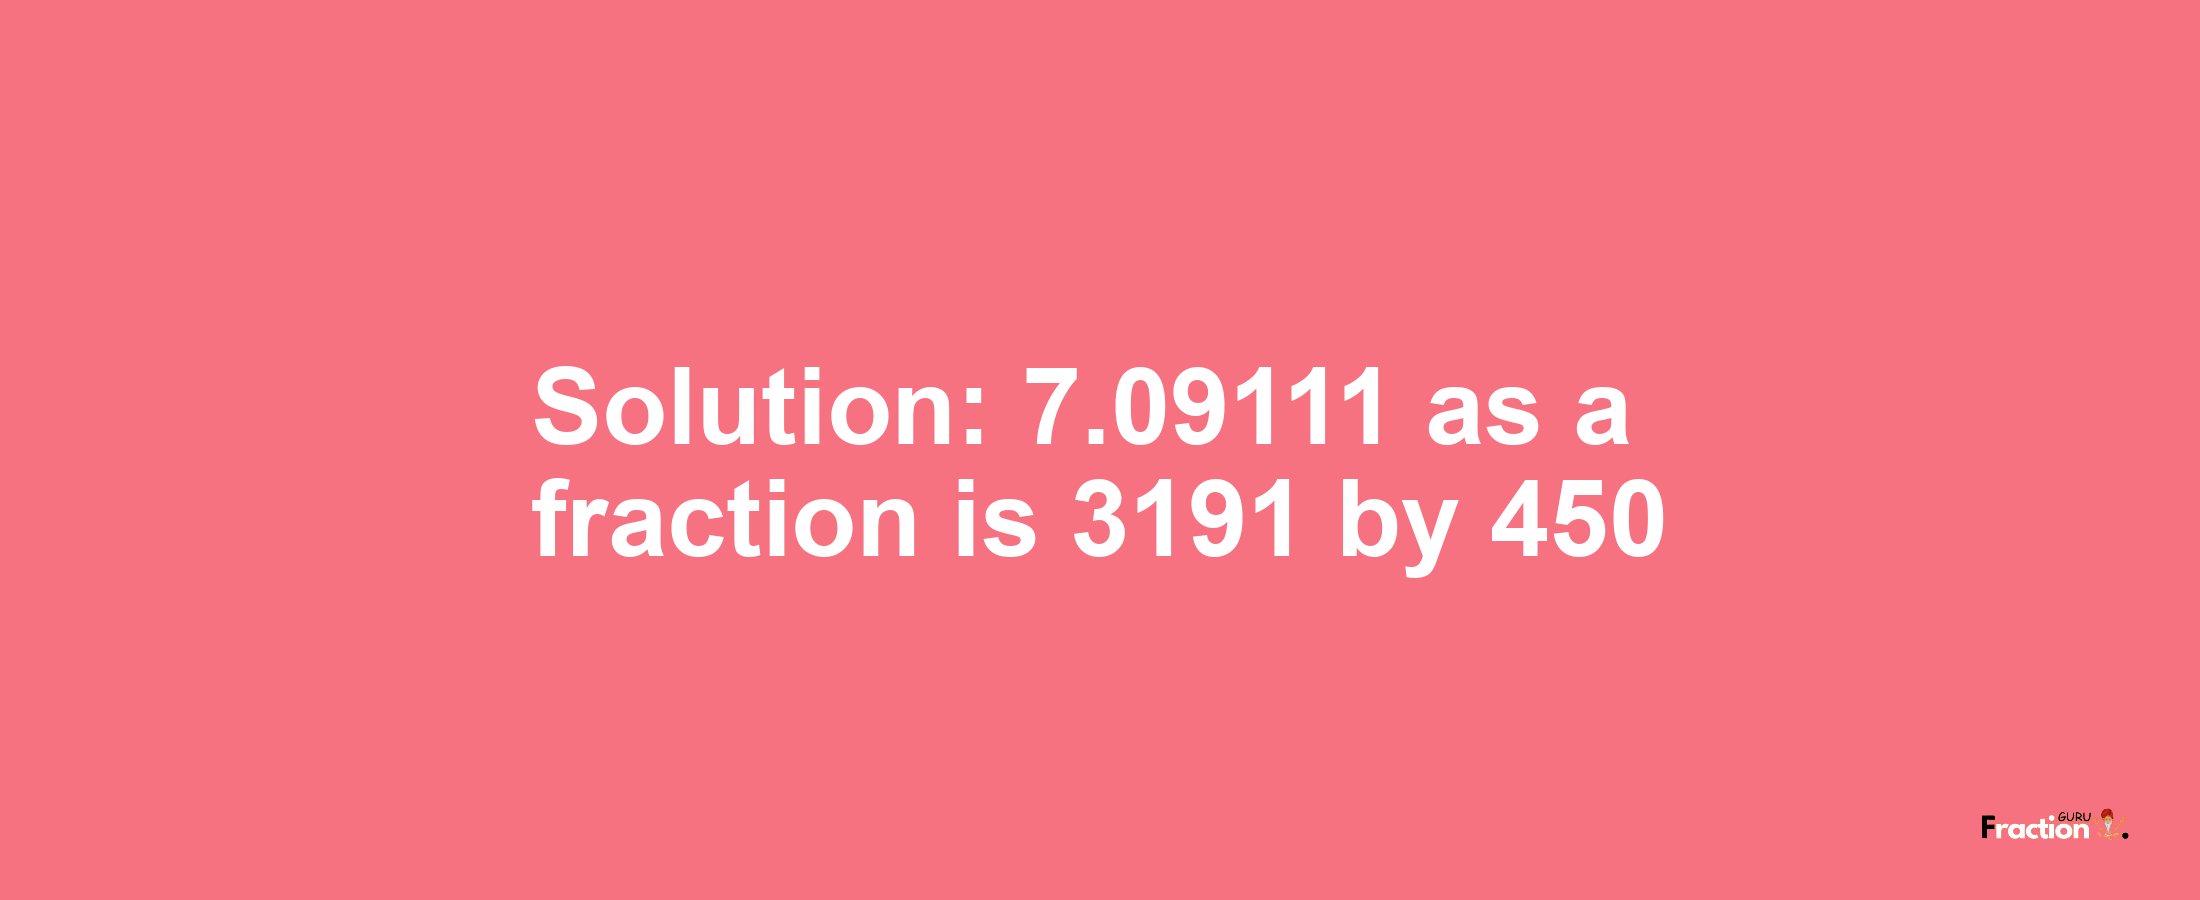 Solution:7.09111 as a fraction is 3191/450